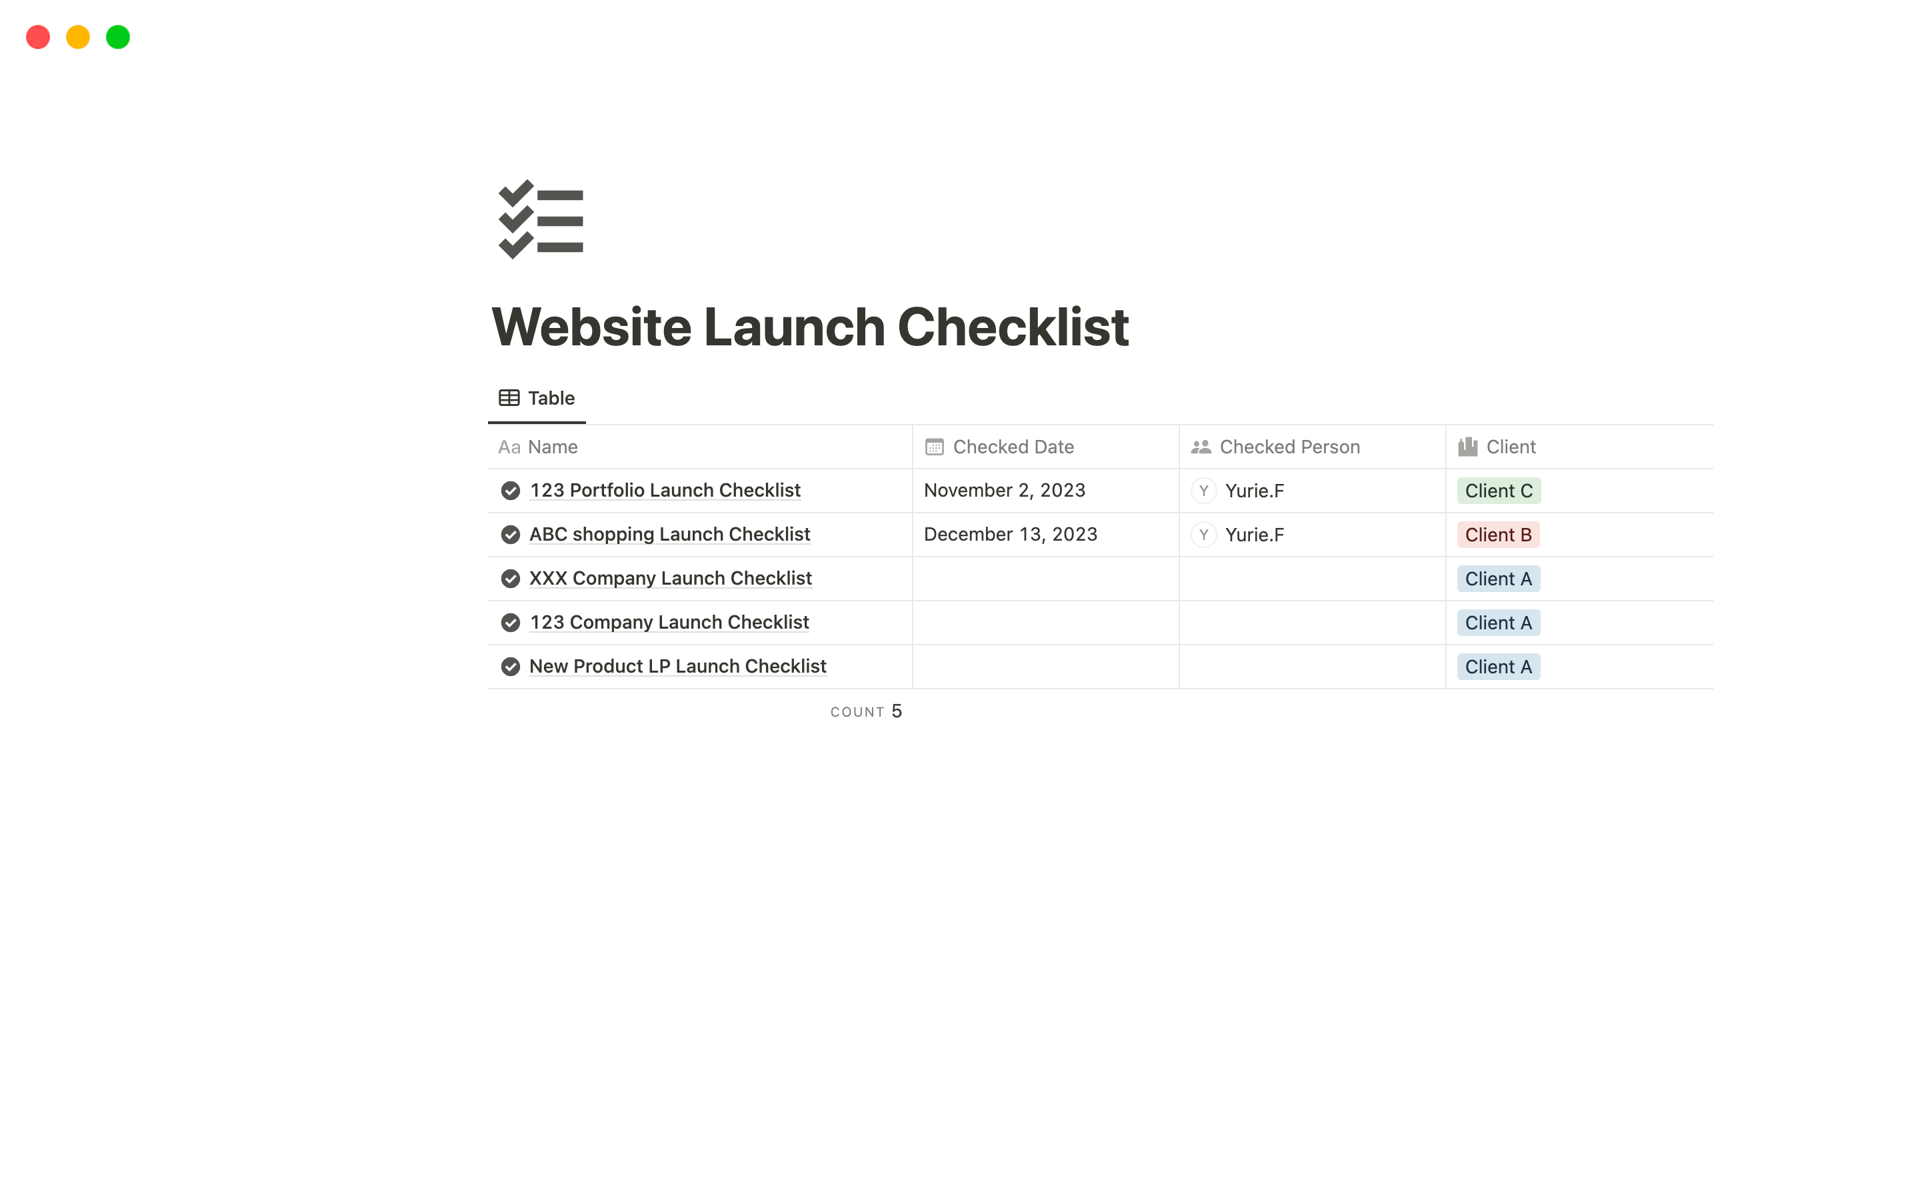 Your go-to checklist for stress-free website launches